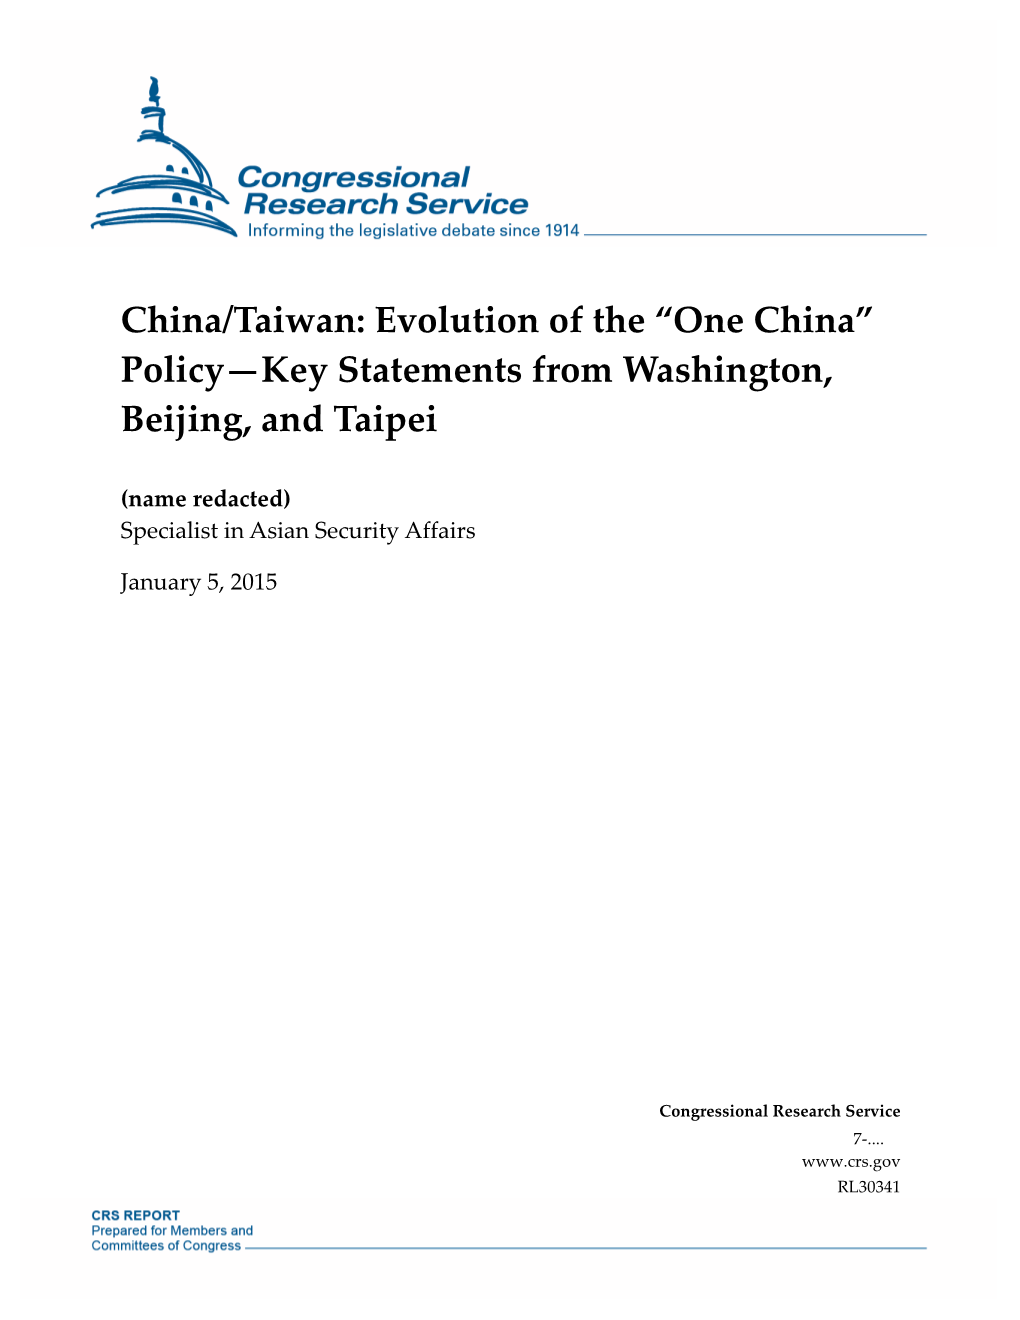 China/Taiwan: Evolution of the “One China” Policy—Key Statements from Washington, Beijing, and Taipei